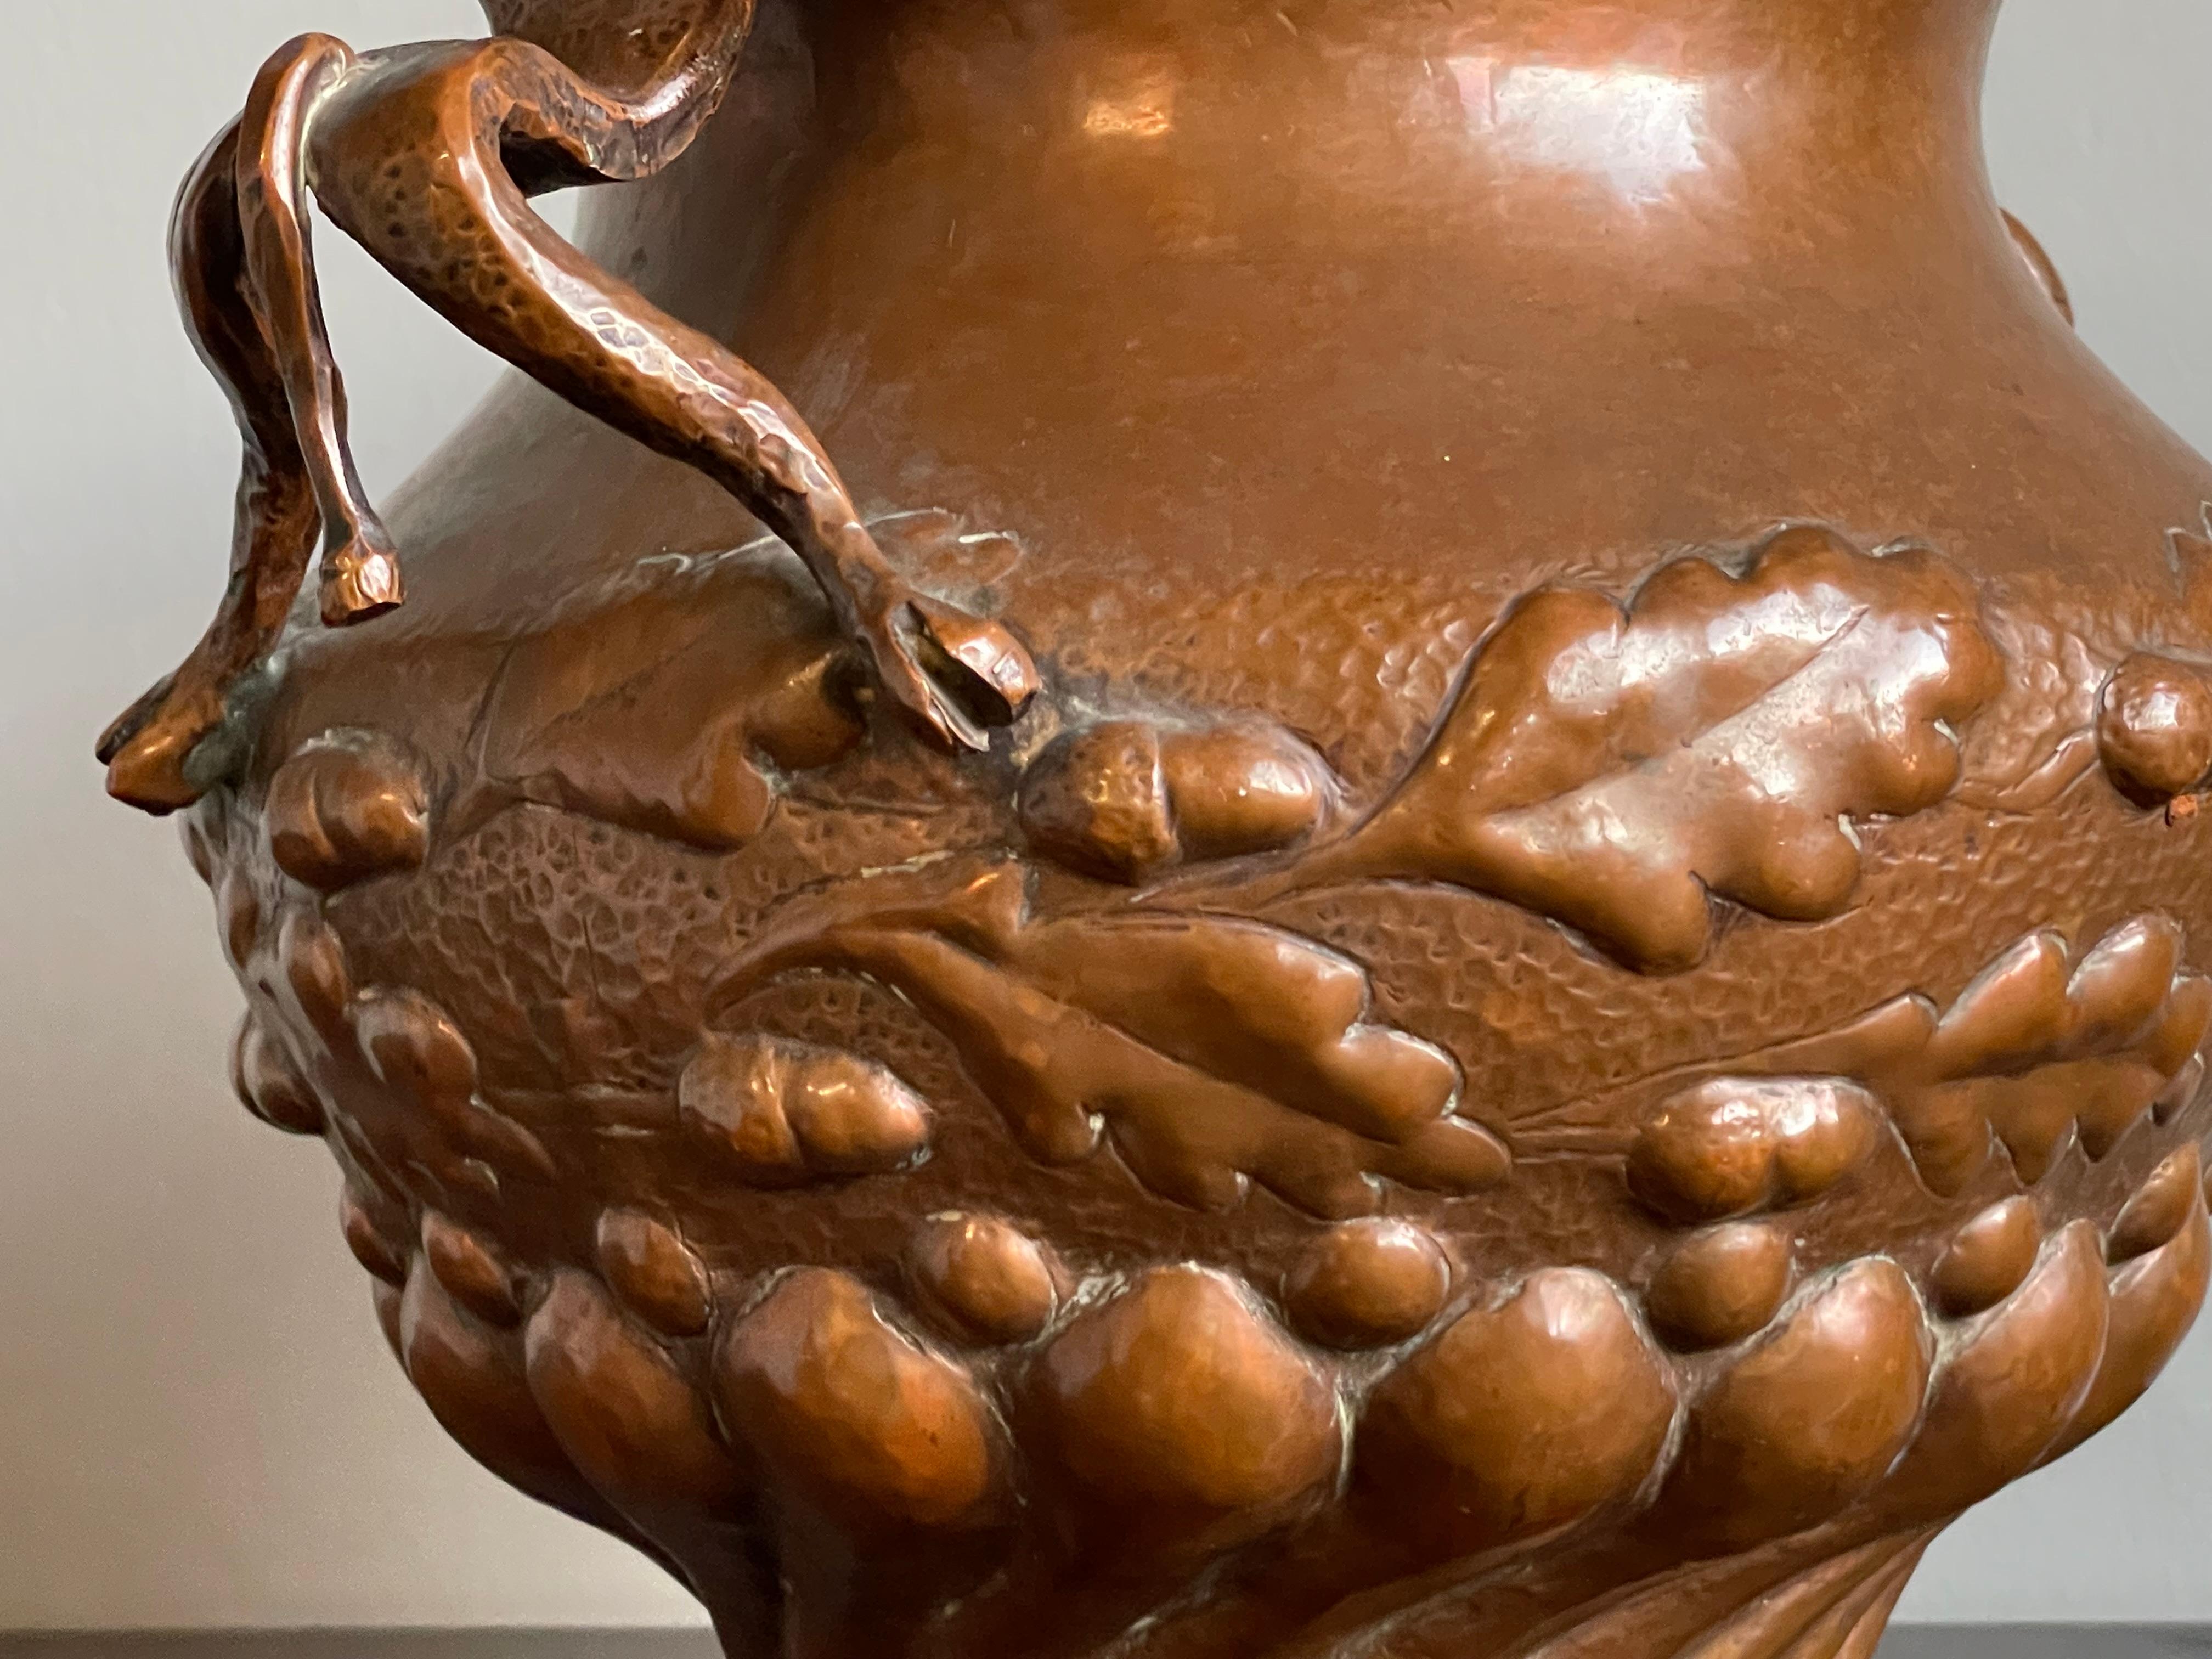 Unique Mid 1800s Embossed Copper Planter / Vase with Satyr Sculptures as Handles For Sale 2